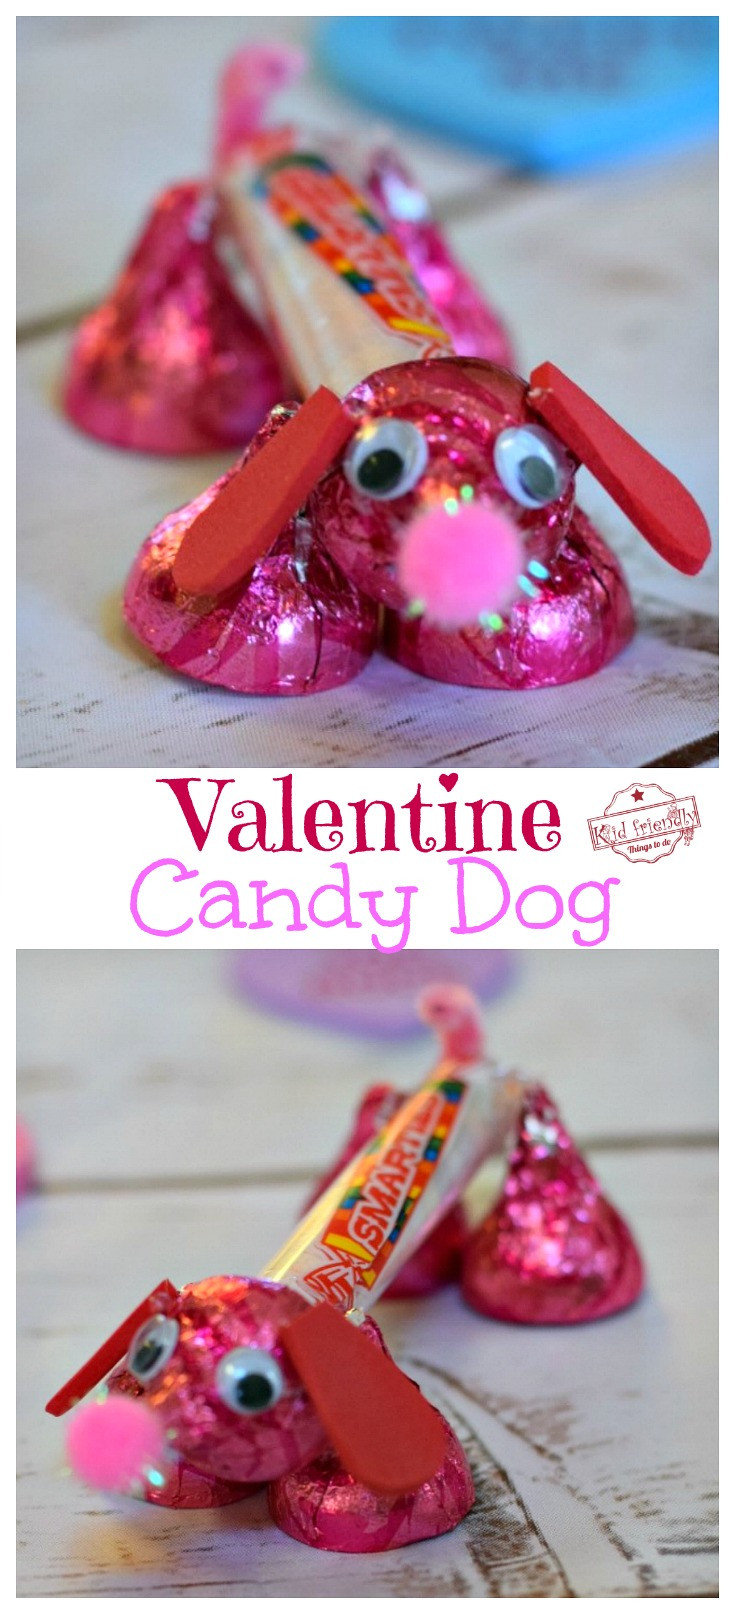 Valentines Day Candy Crafts
 Make A Valentine s Candy Dog for a Fun Kid s Craft and Treat